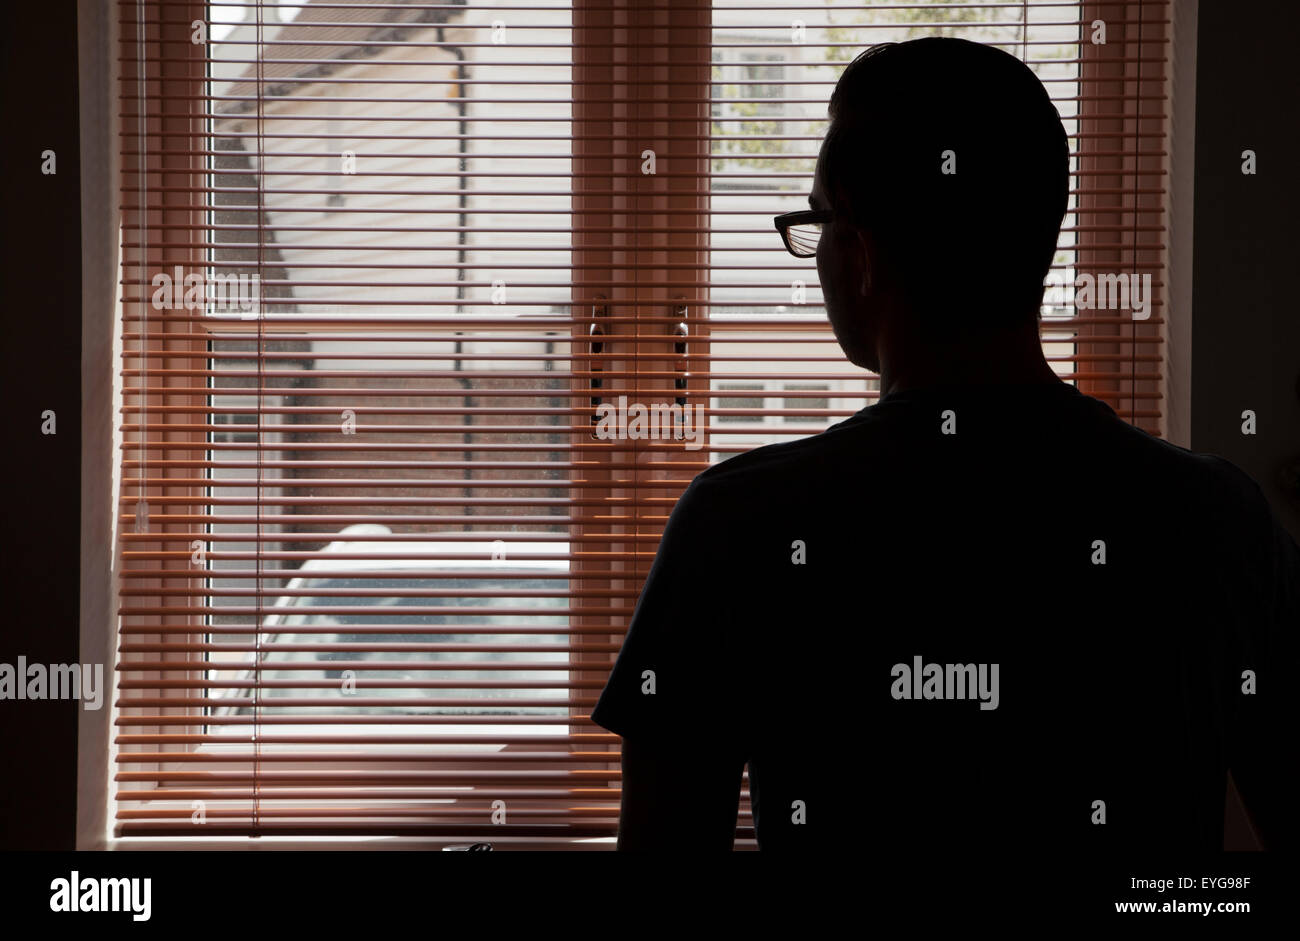 Young man in a kitchen looking out through a window blind. Stock Photo